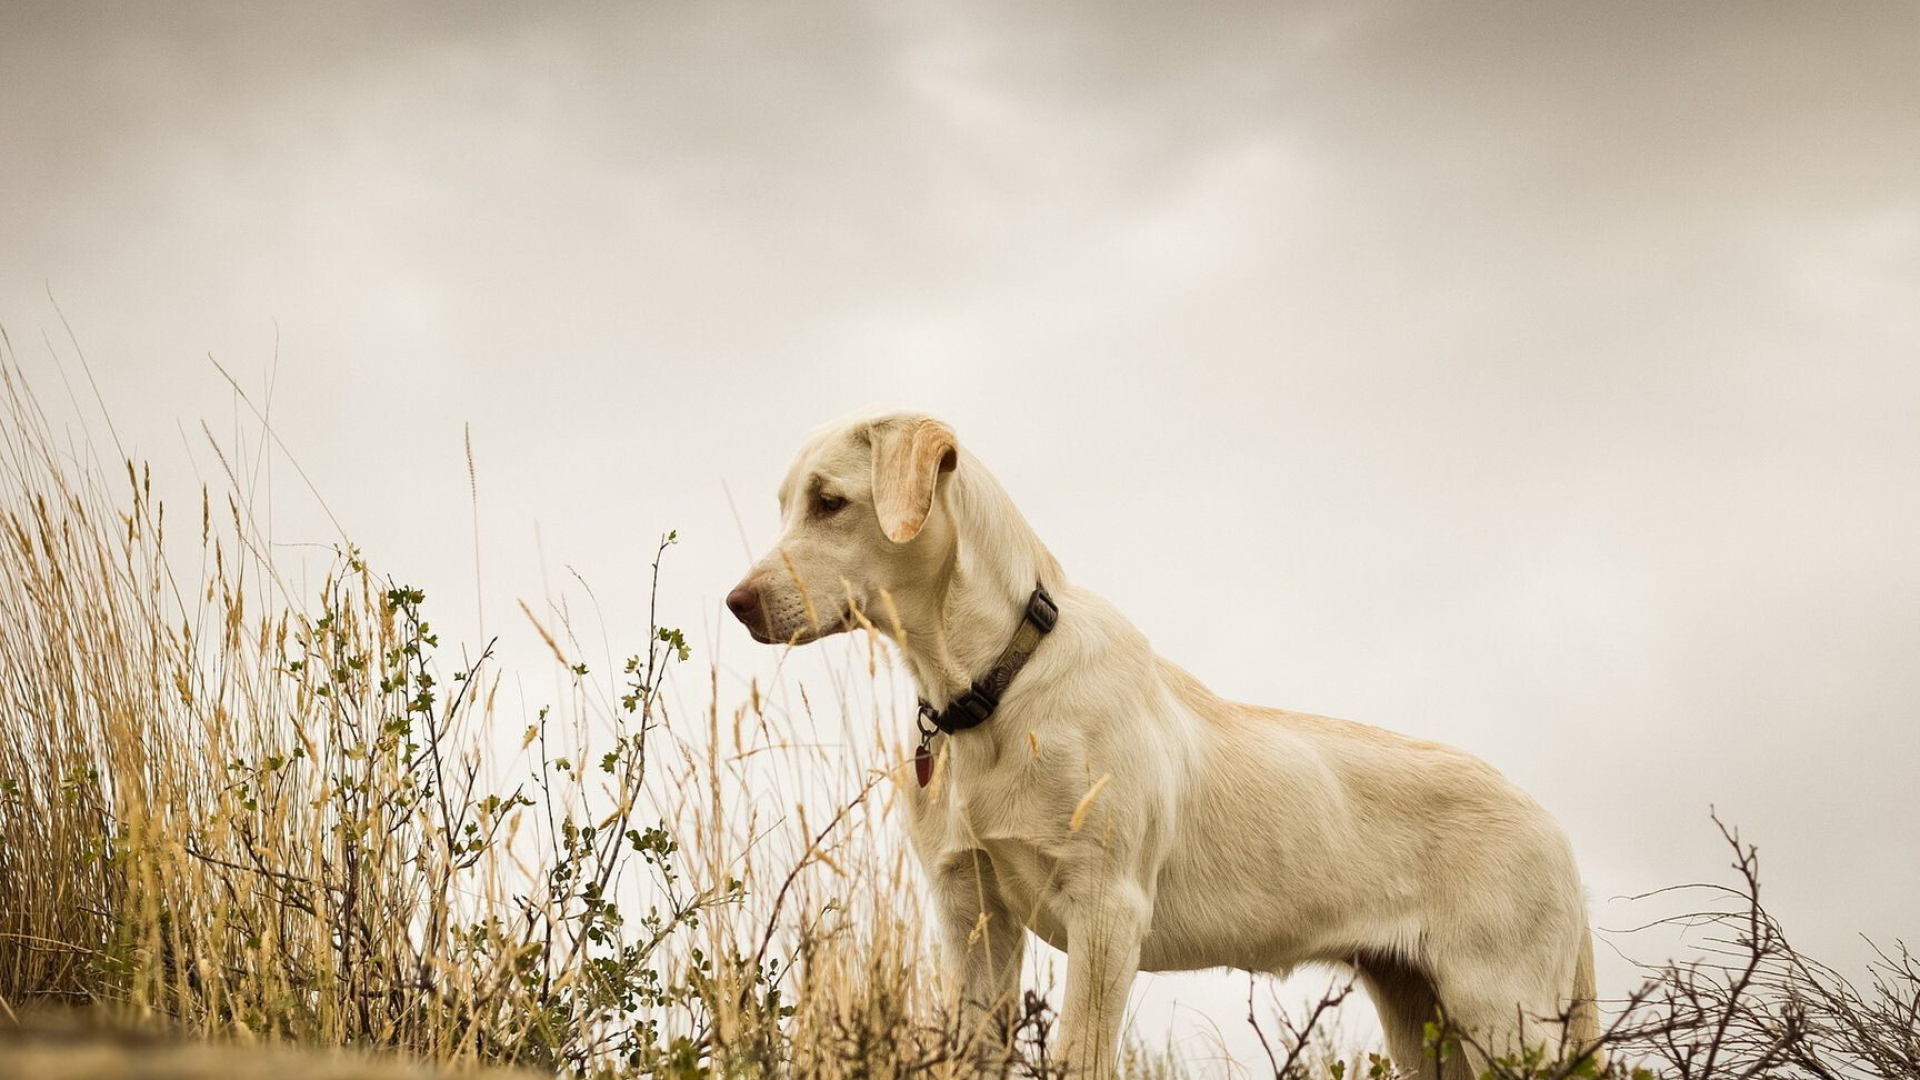 Labrador Retriever: Animal, A sturdy dog, weighing in at anywhere from 55 to 80 pounds. 1920x1080 Full HD Wallpaper.